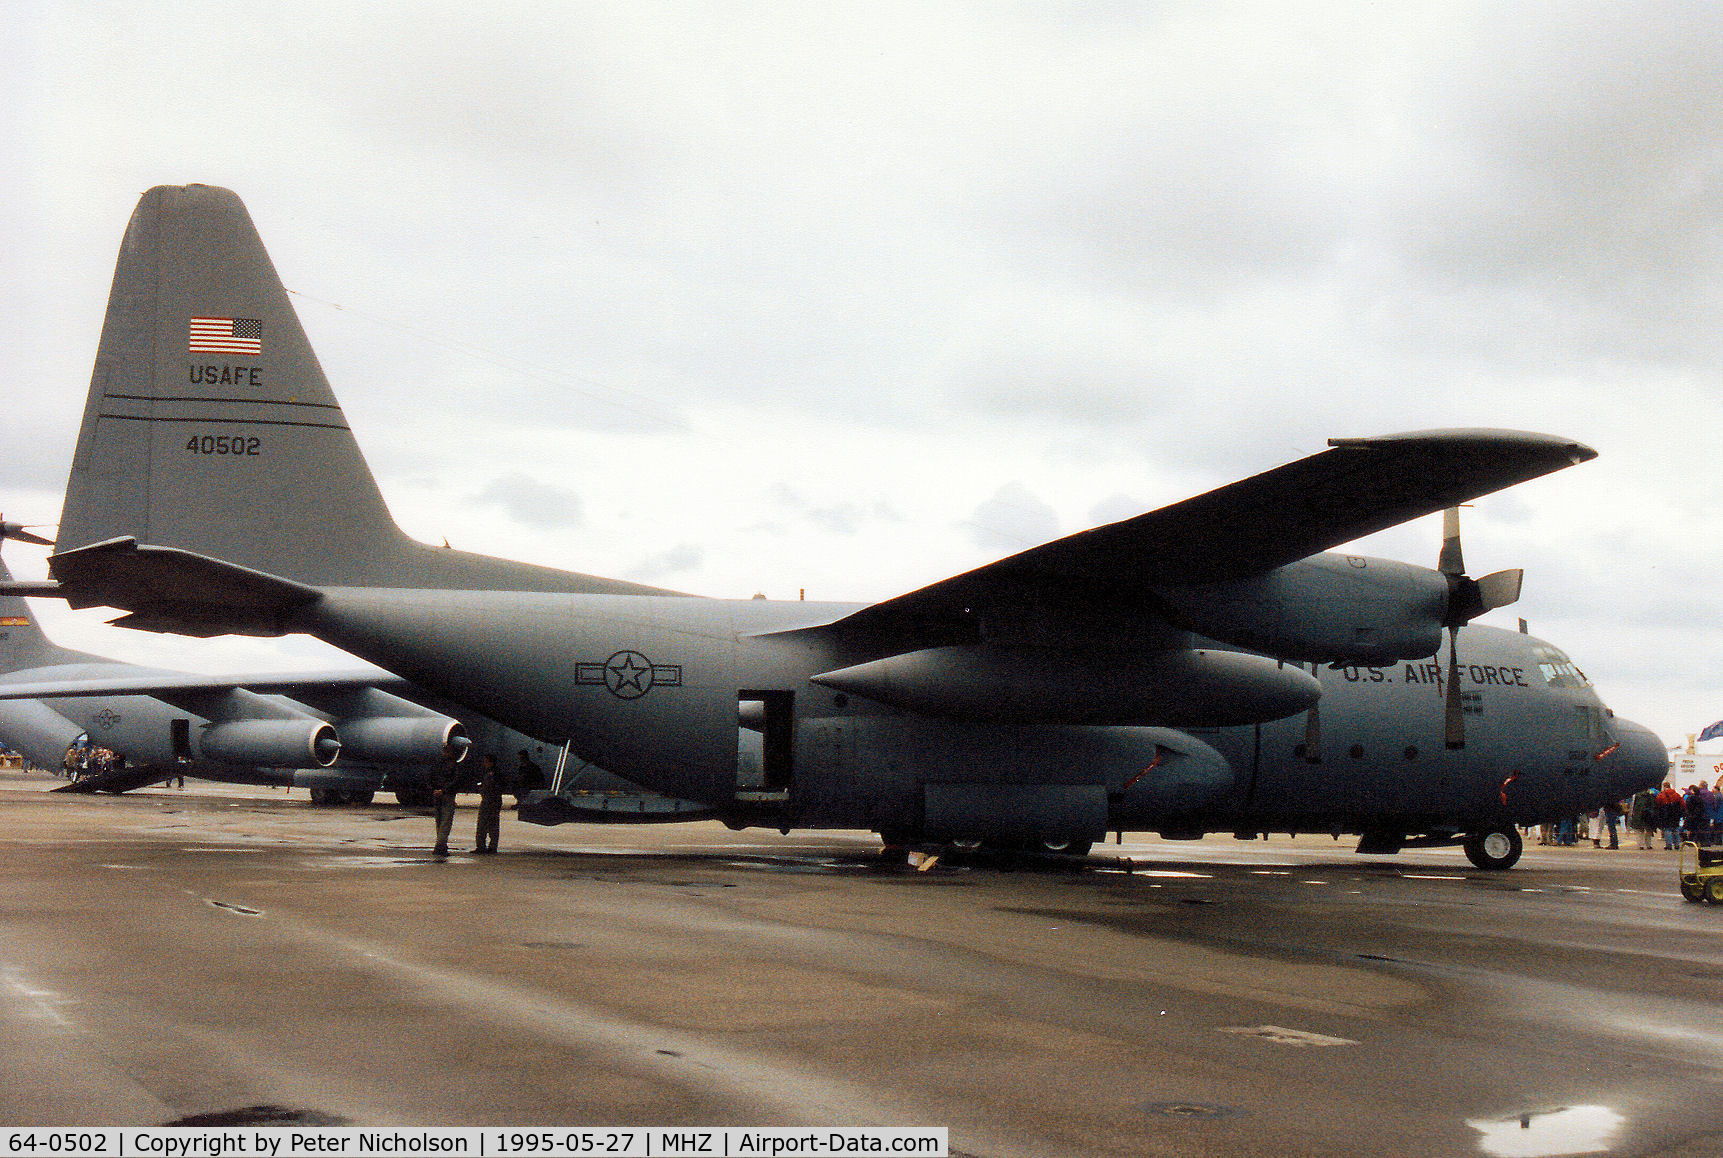 64-0502, 1964 Lockheed C-130E Hercules C/N 382-3986, C-130E Hercules, callsign Herky 03, of 37th Airlift Squadron based at Ramstein on display at the 1995 RAF Mildenhall Air Fete.